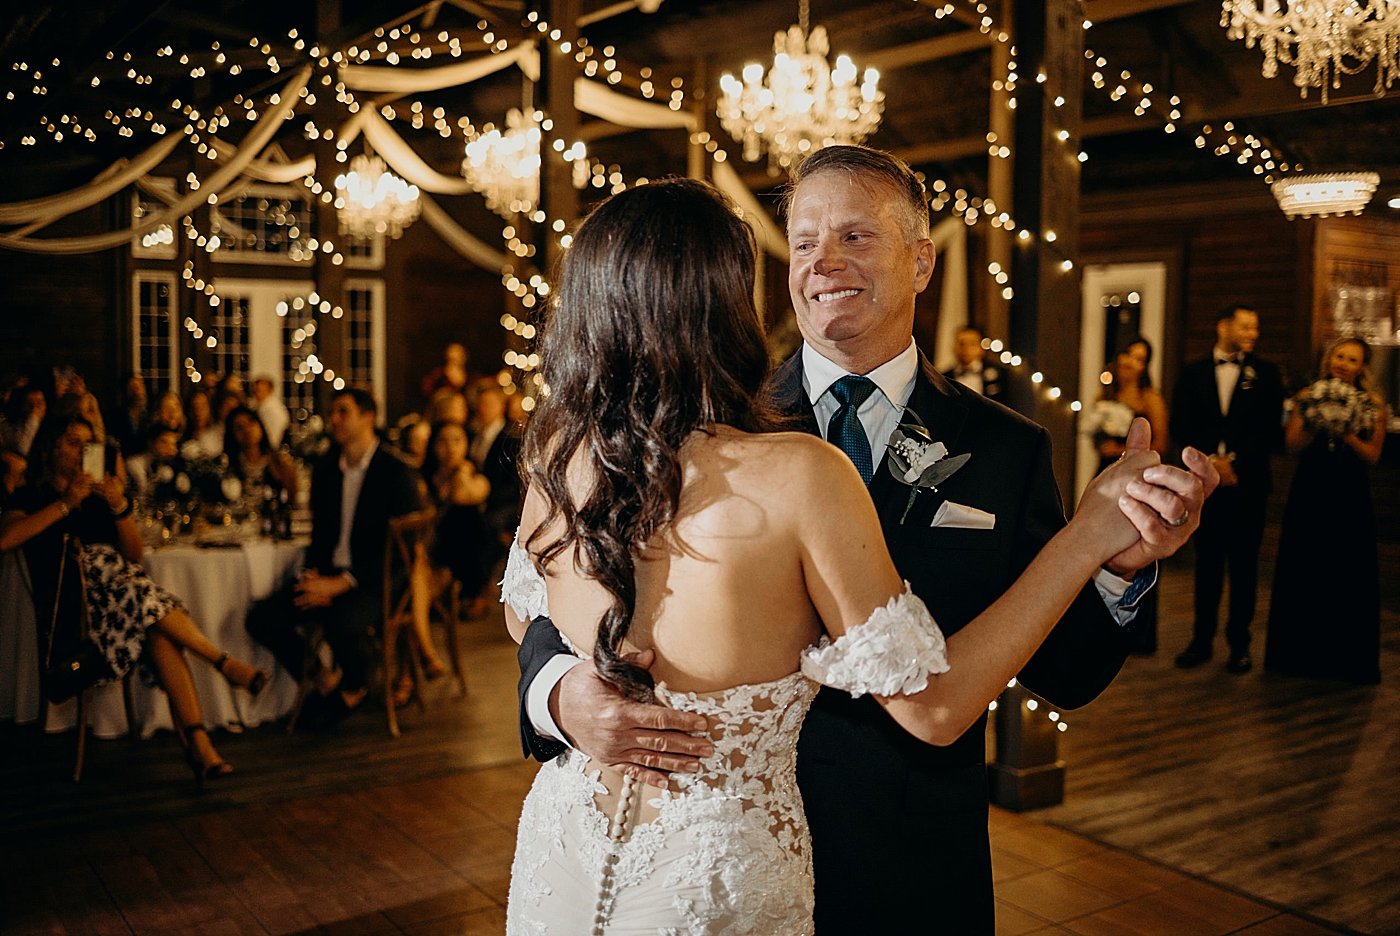 Father Daughter dance at reception Ever After Farms Wedding Photography captured by South Florida Wedding Photographer Maggie Alvarez Photography